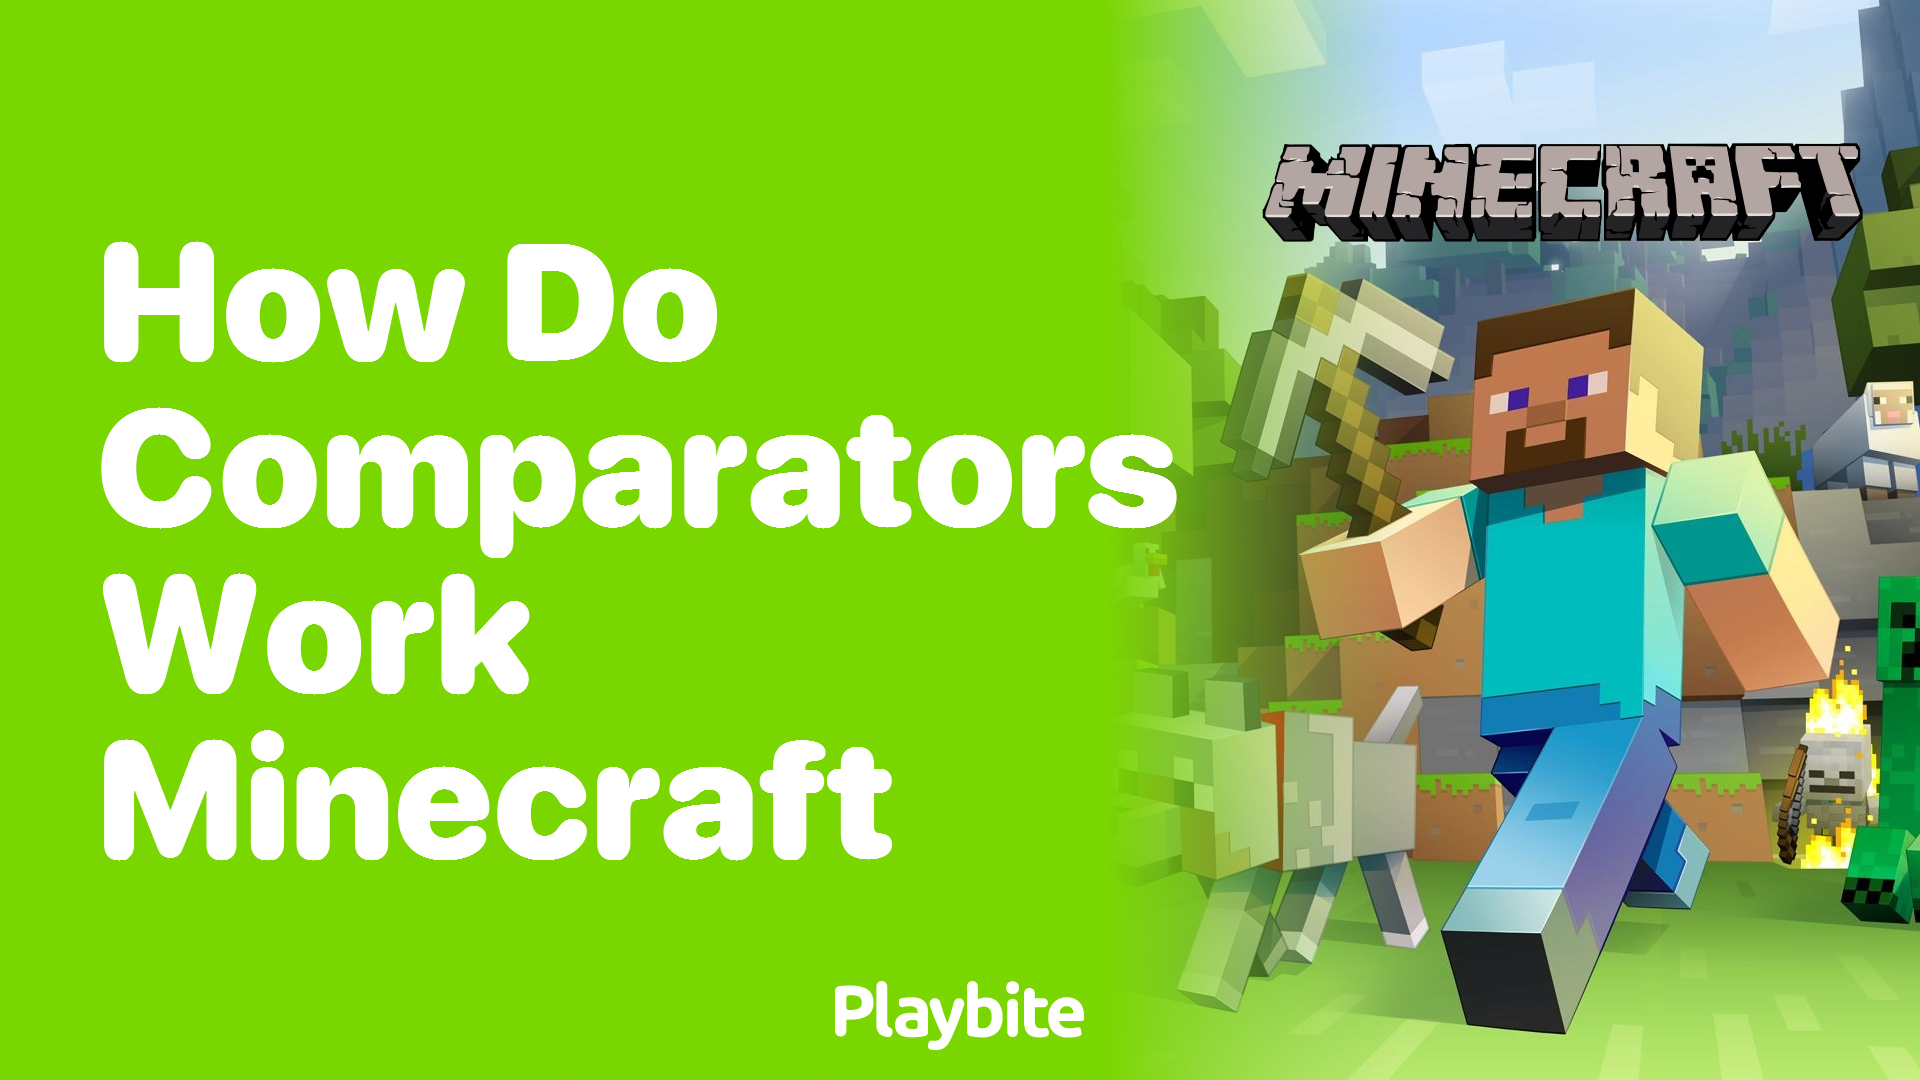 How Do Comparators Work in Minecraft?